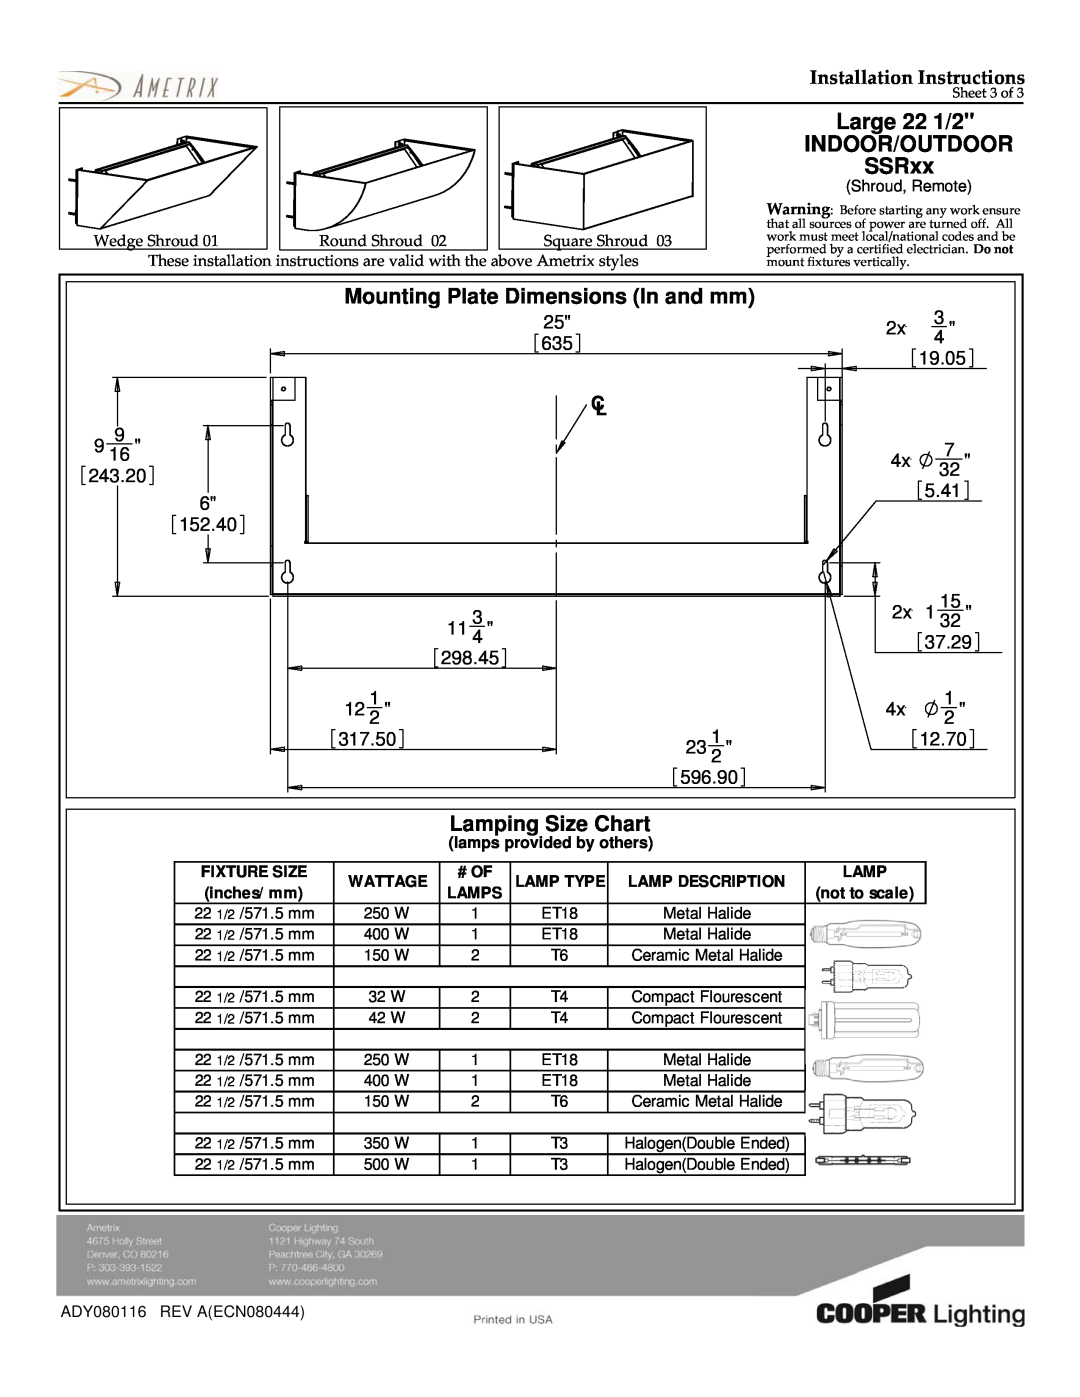 Cooper Lighting dimensions Large 22 1/2 INDOOR/OUTDOOR SSRxx, Mounting Plate Dimensions In and mm, Lamping Size Chart 